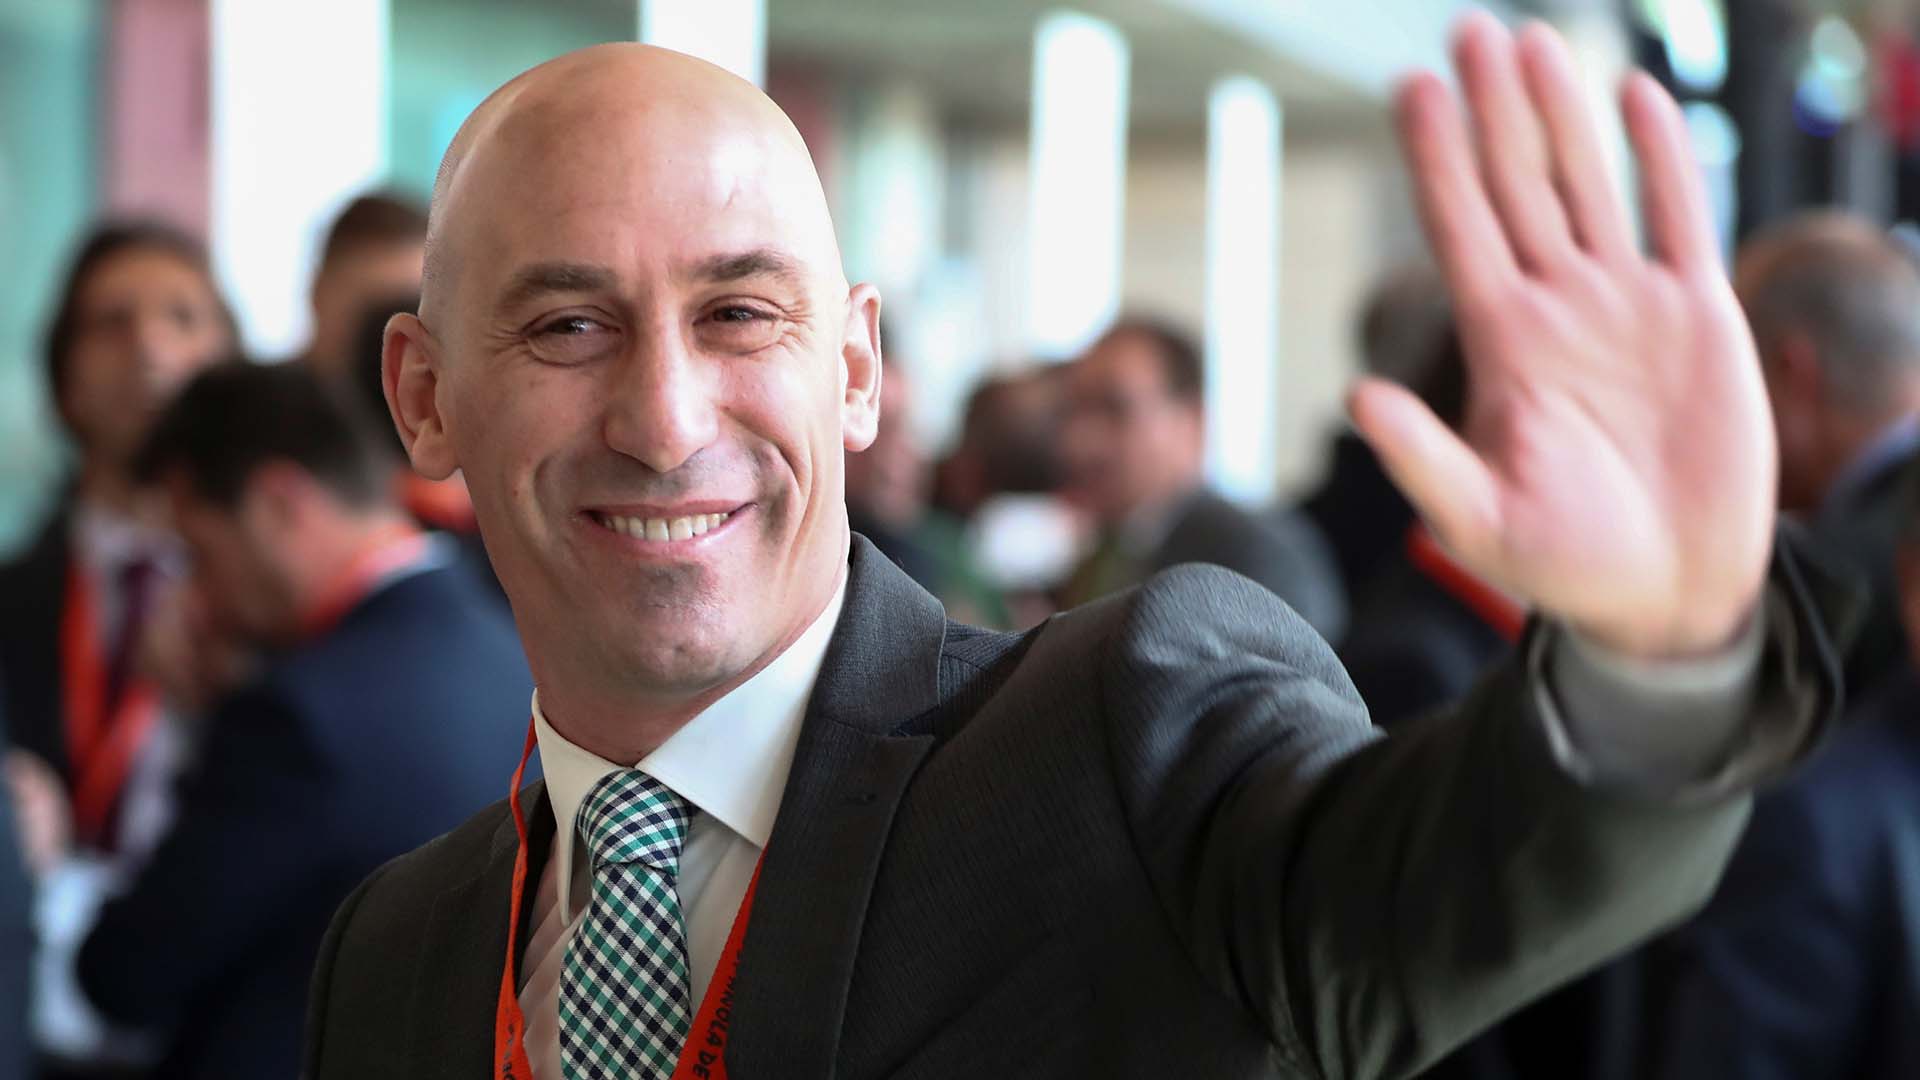 Luis Rubiales has given a speech in which he says he refuses to resign